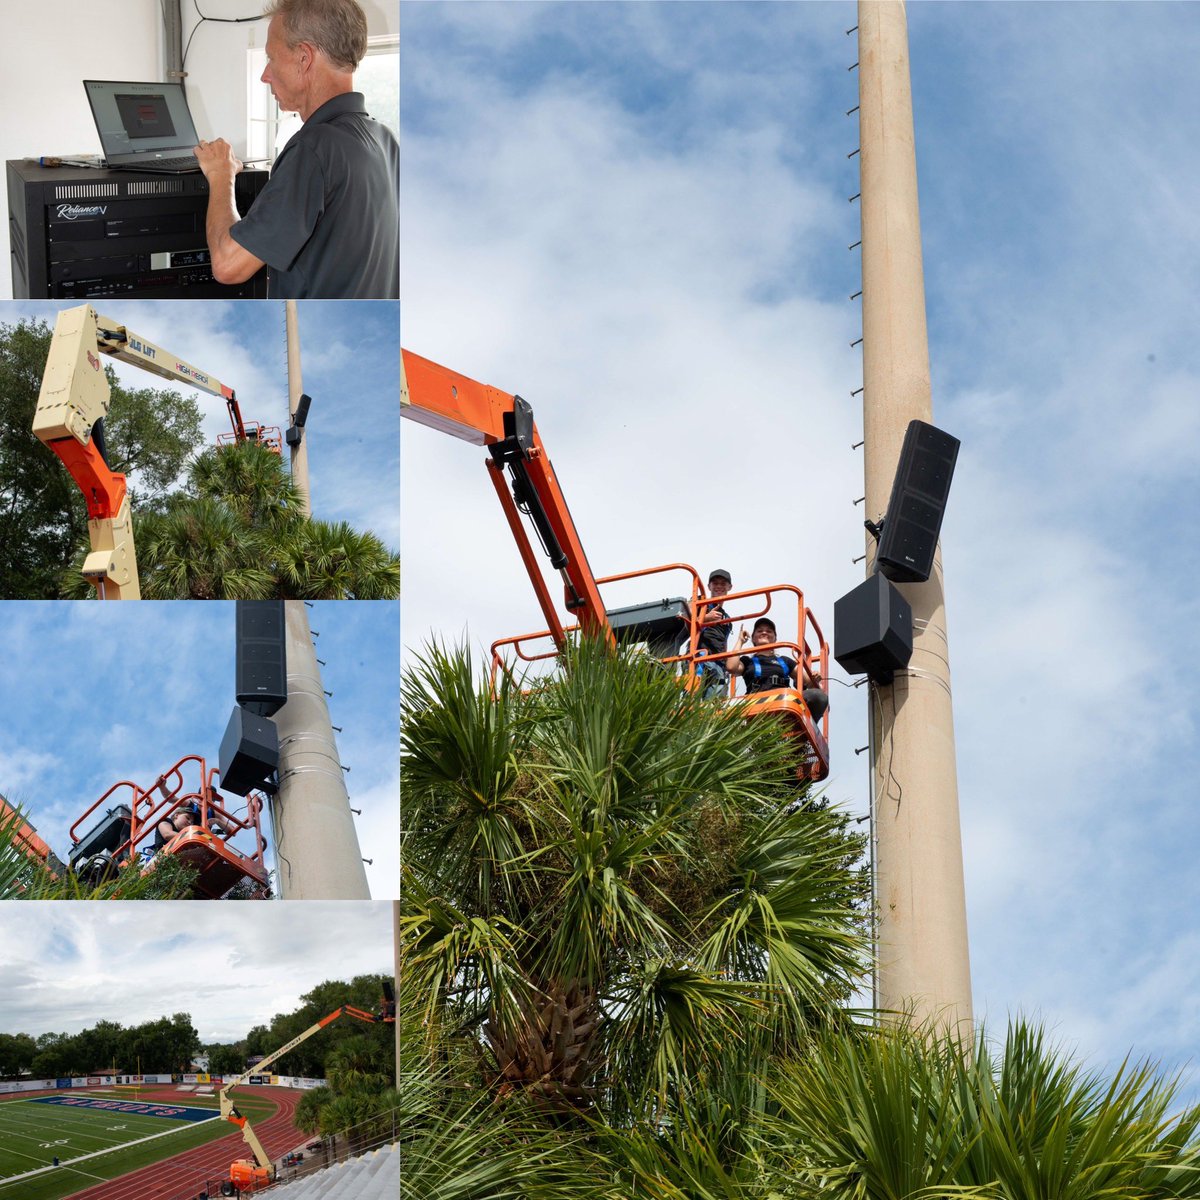 How many @lakebrantley alumni does it take to upgrade the stadium speaker system? 4 & 1 alumni dad. The team spent a few hot days installing & commissioning a very much improved @Electro_Voice  system. #proav #womeninav #ignite #askchet #electrovoice #relianceav #orlandoav